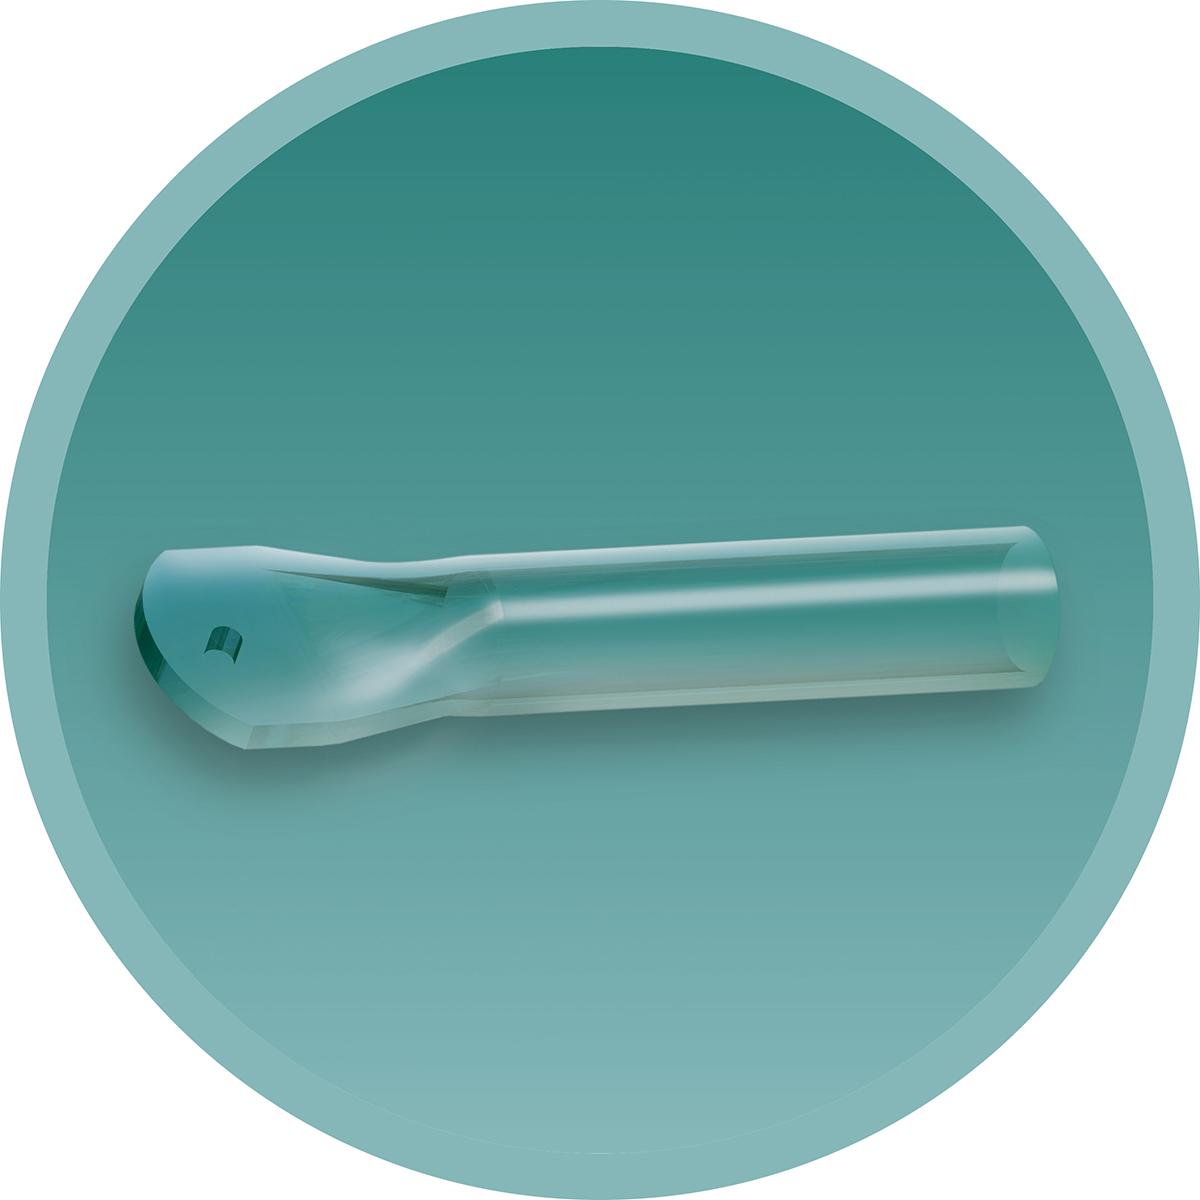 Product Neurocap - synthetic tube for supplying nerve endings - MED&CARE - Innovative Solutions image